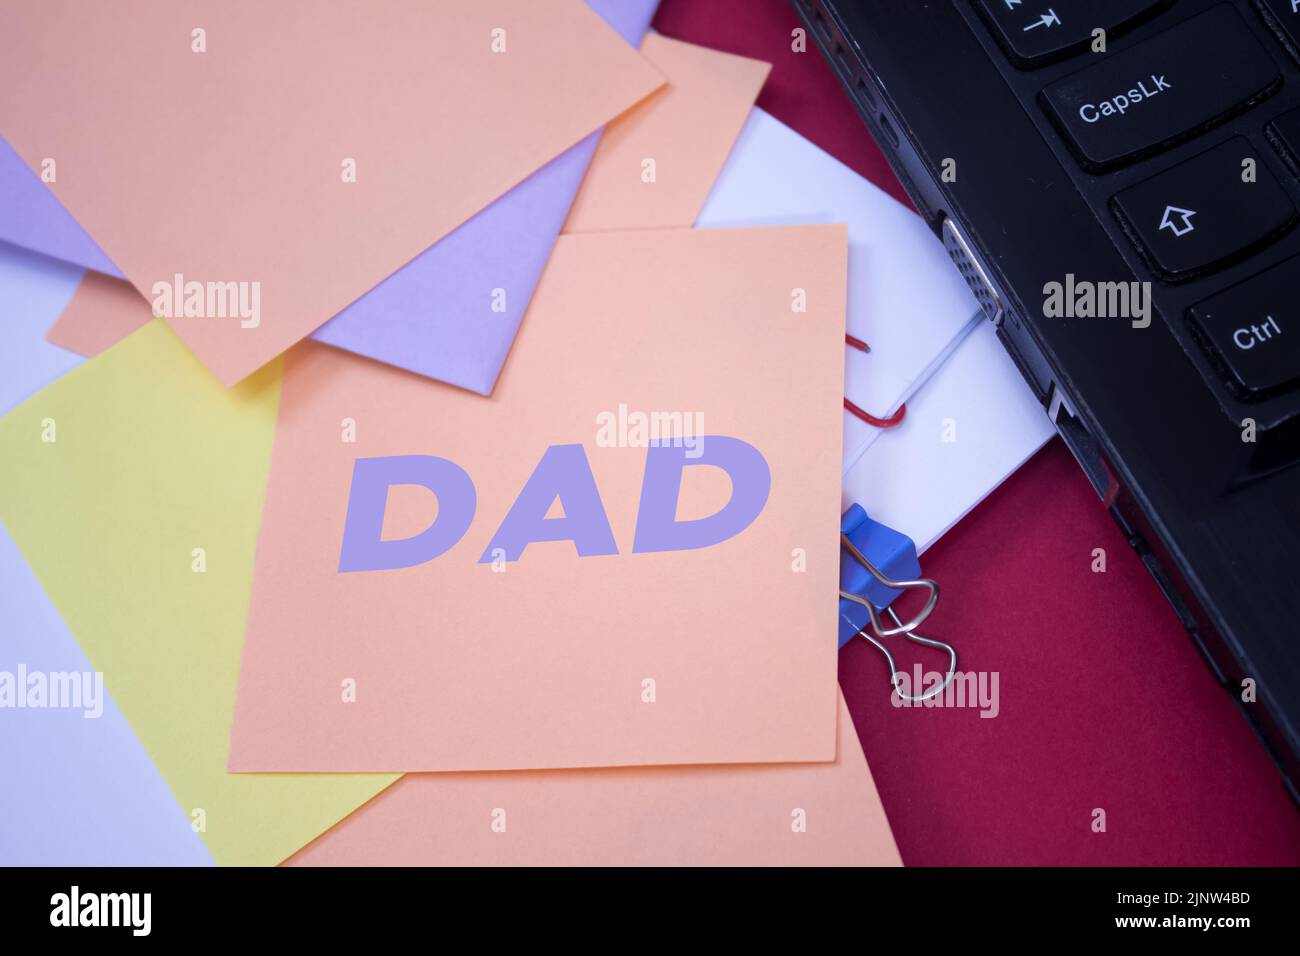 Dad. Text on adhesive note paper. Event, celebration reminder message. Stock Photo